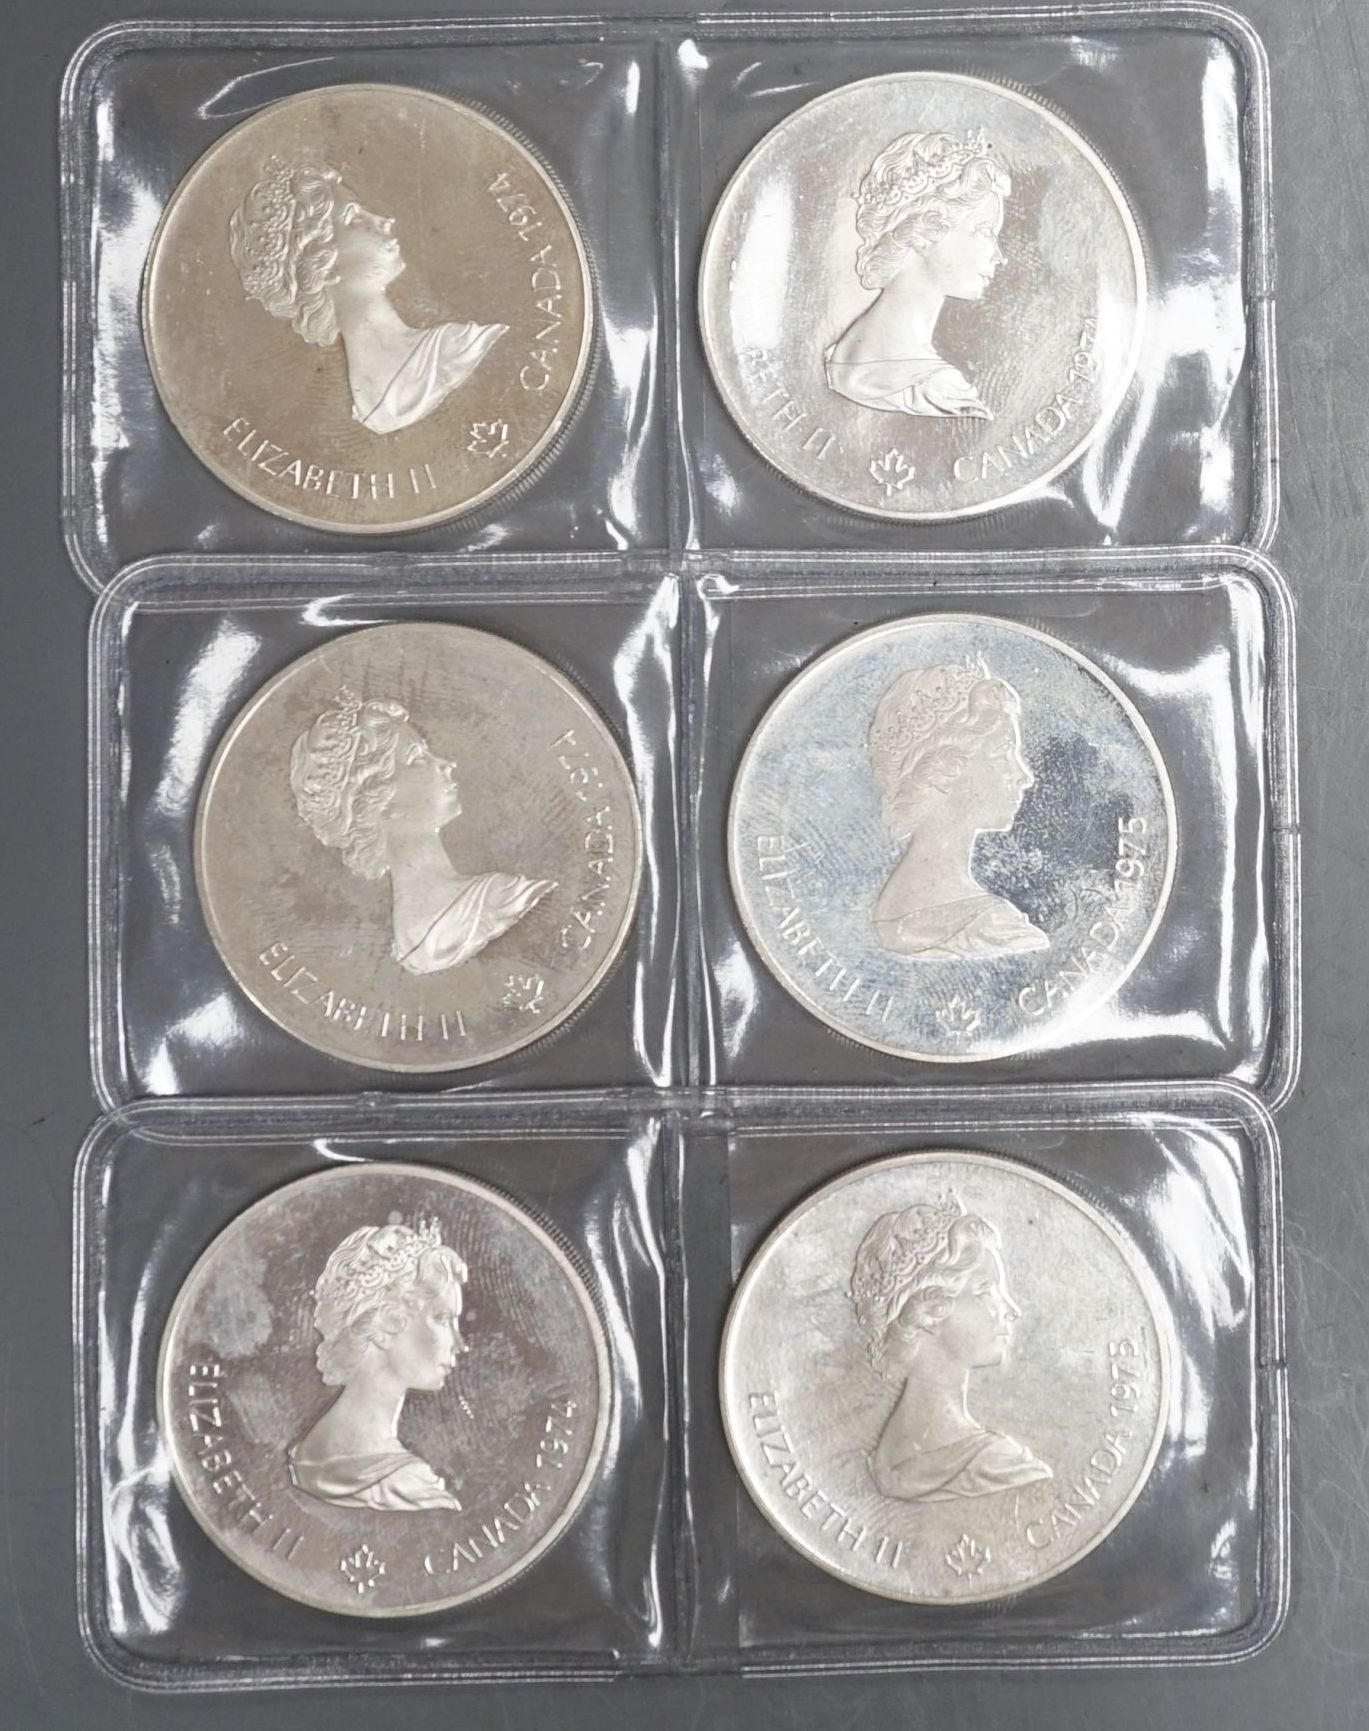 Six Canadian $5 silver Olympic Coins Montreal 1976 Games, total weight 146.4 grams.